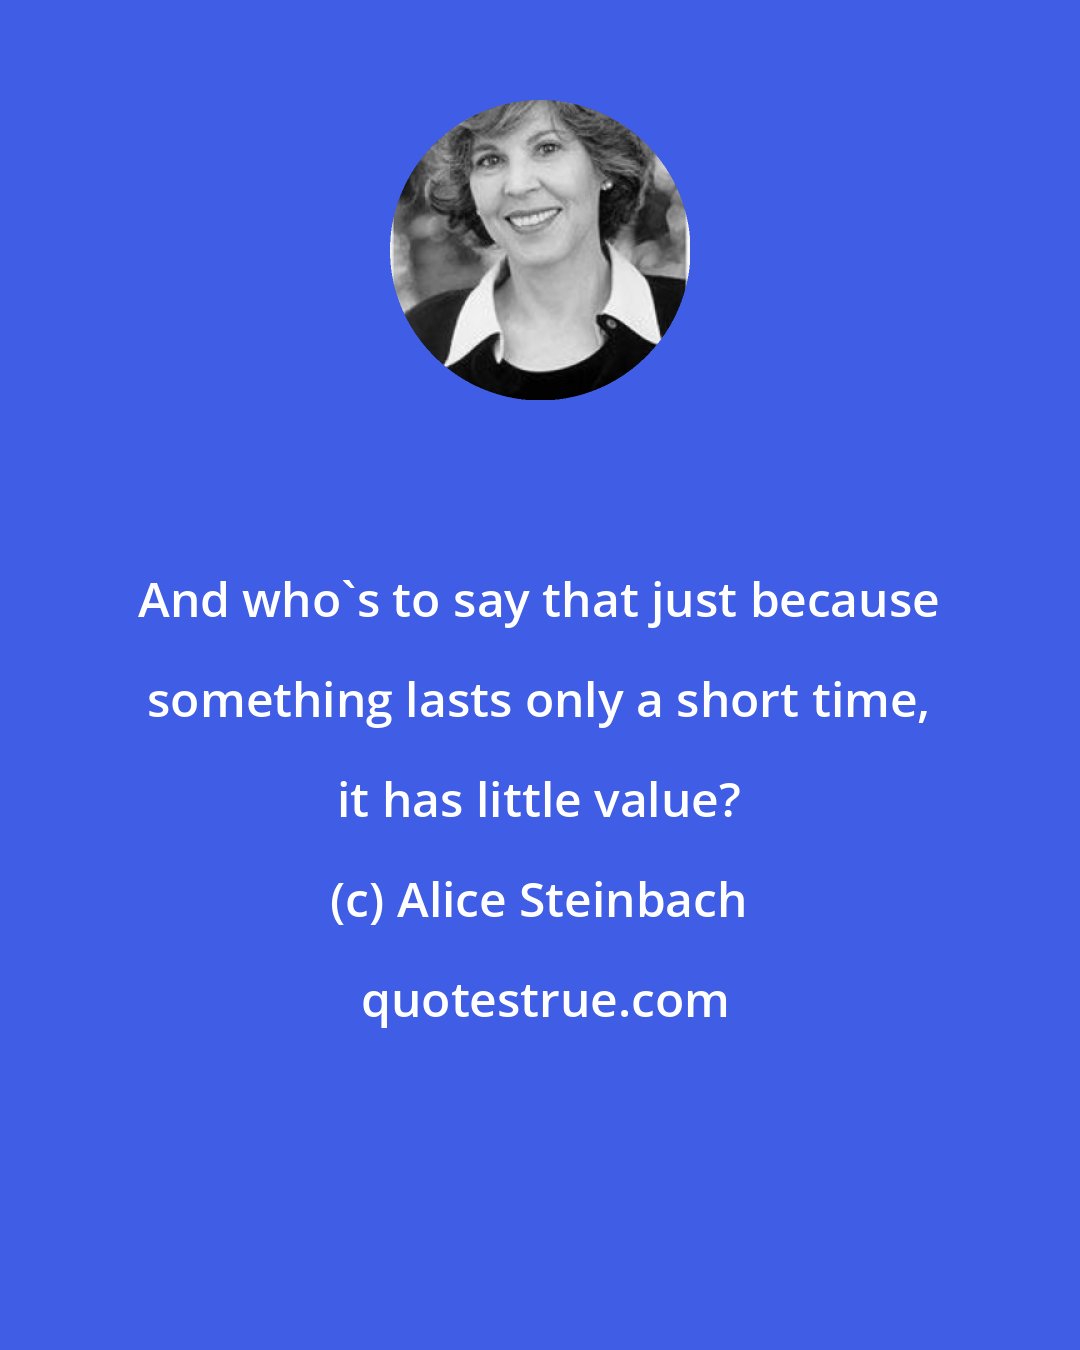 Alice Steinbach: And who's to say that just because something lasts only a short time, it has little value?